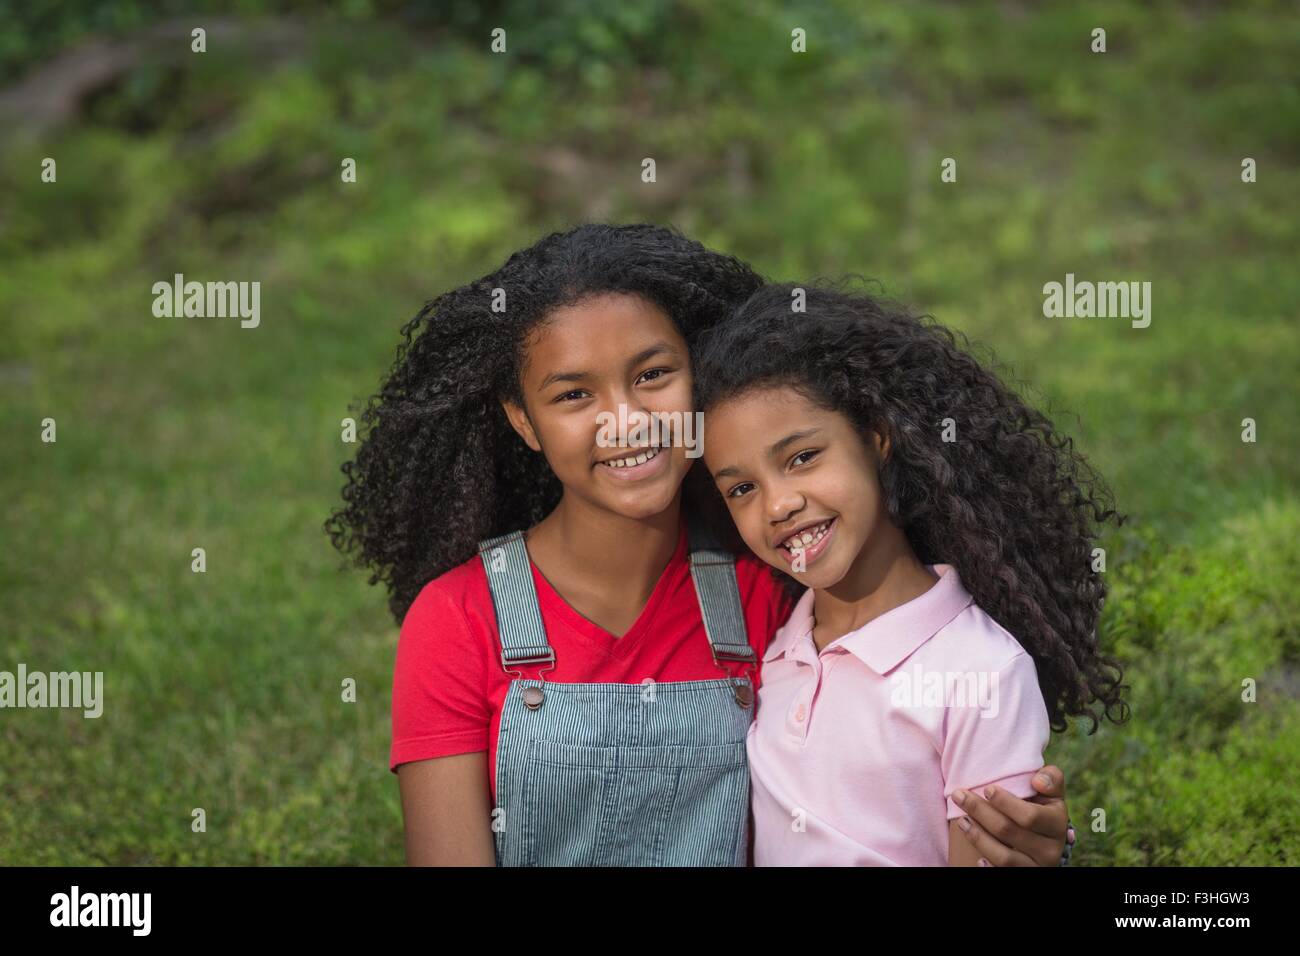 Portrait of girl with arm around her sister, looking at camera smiling Stock Photo